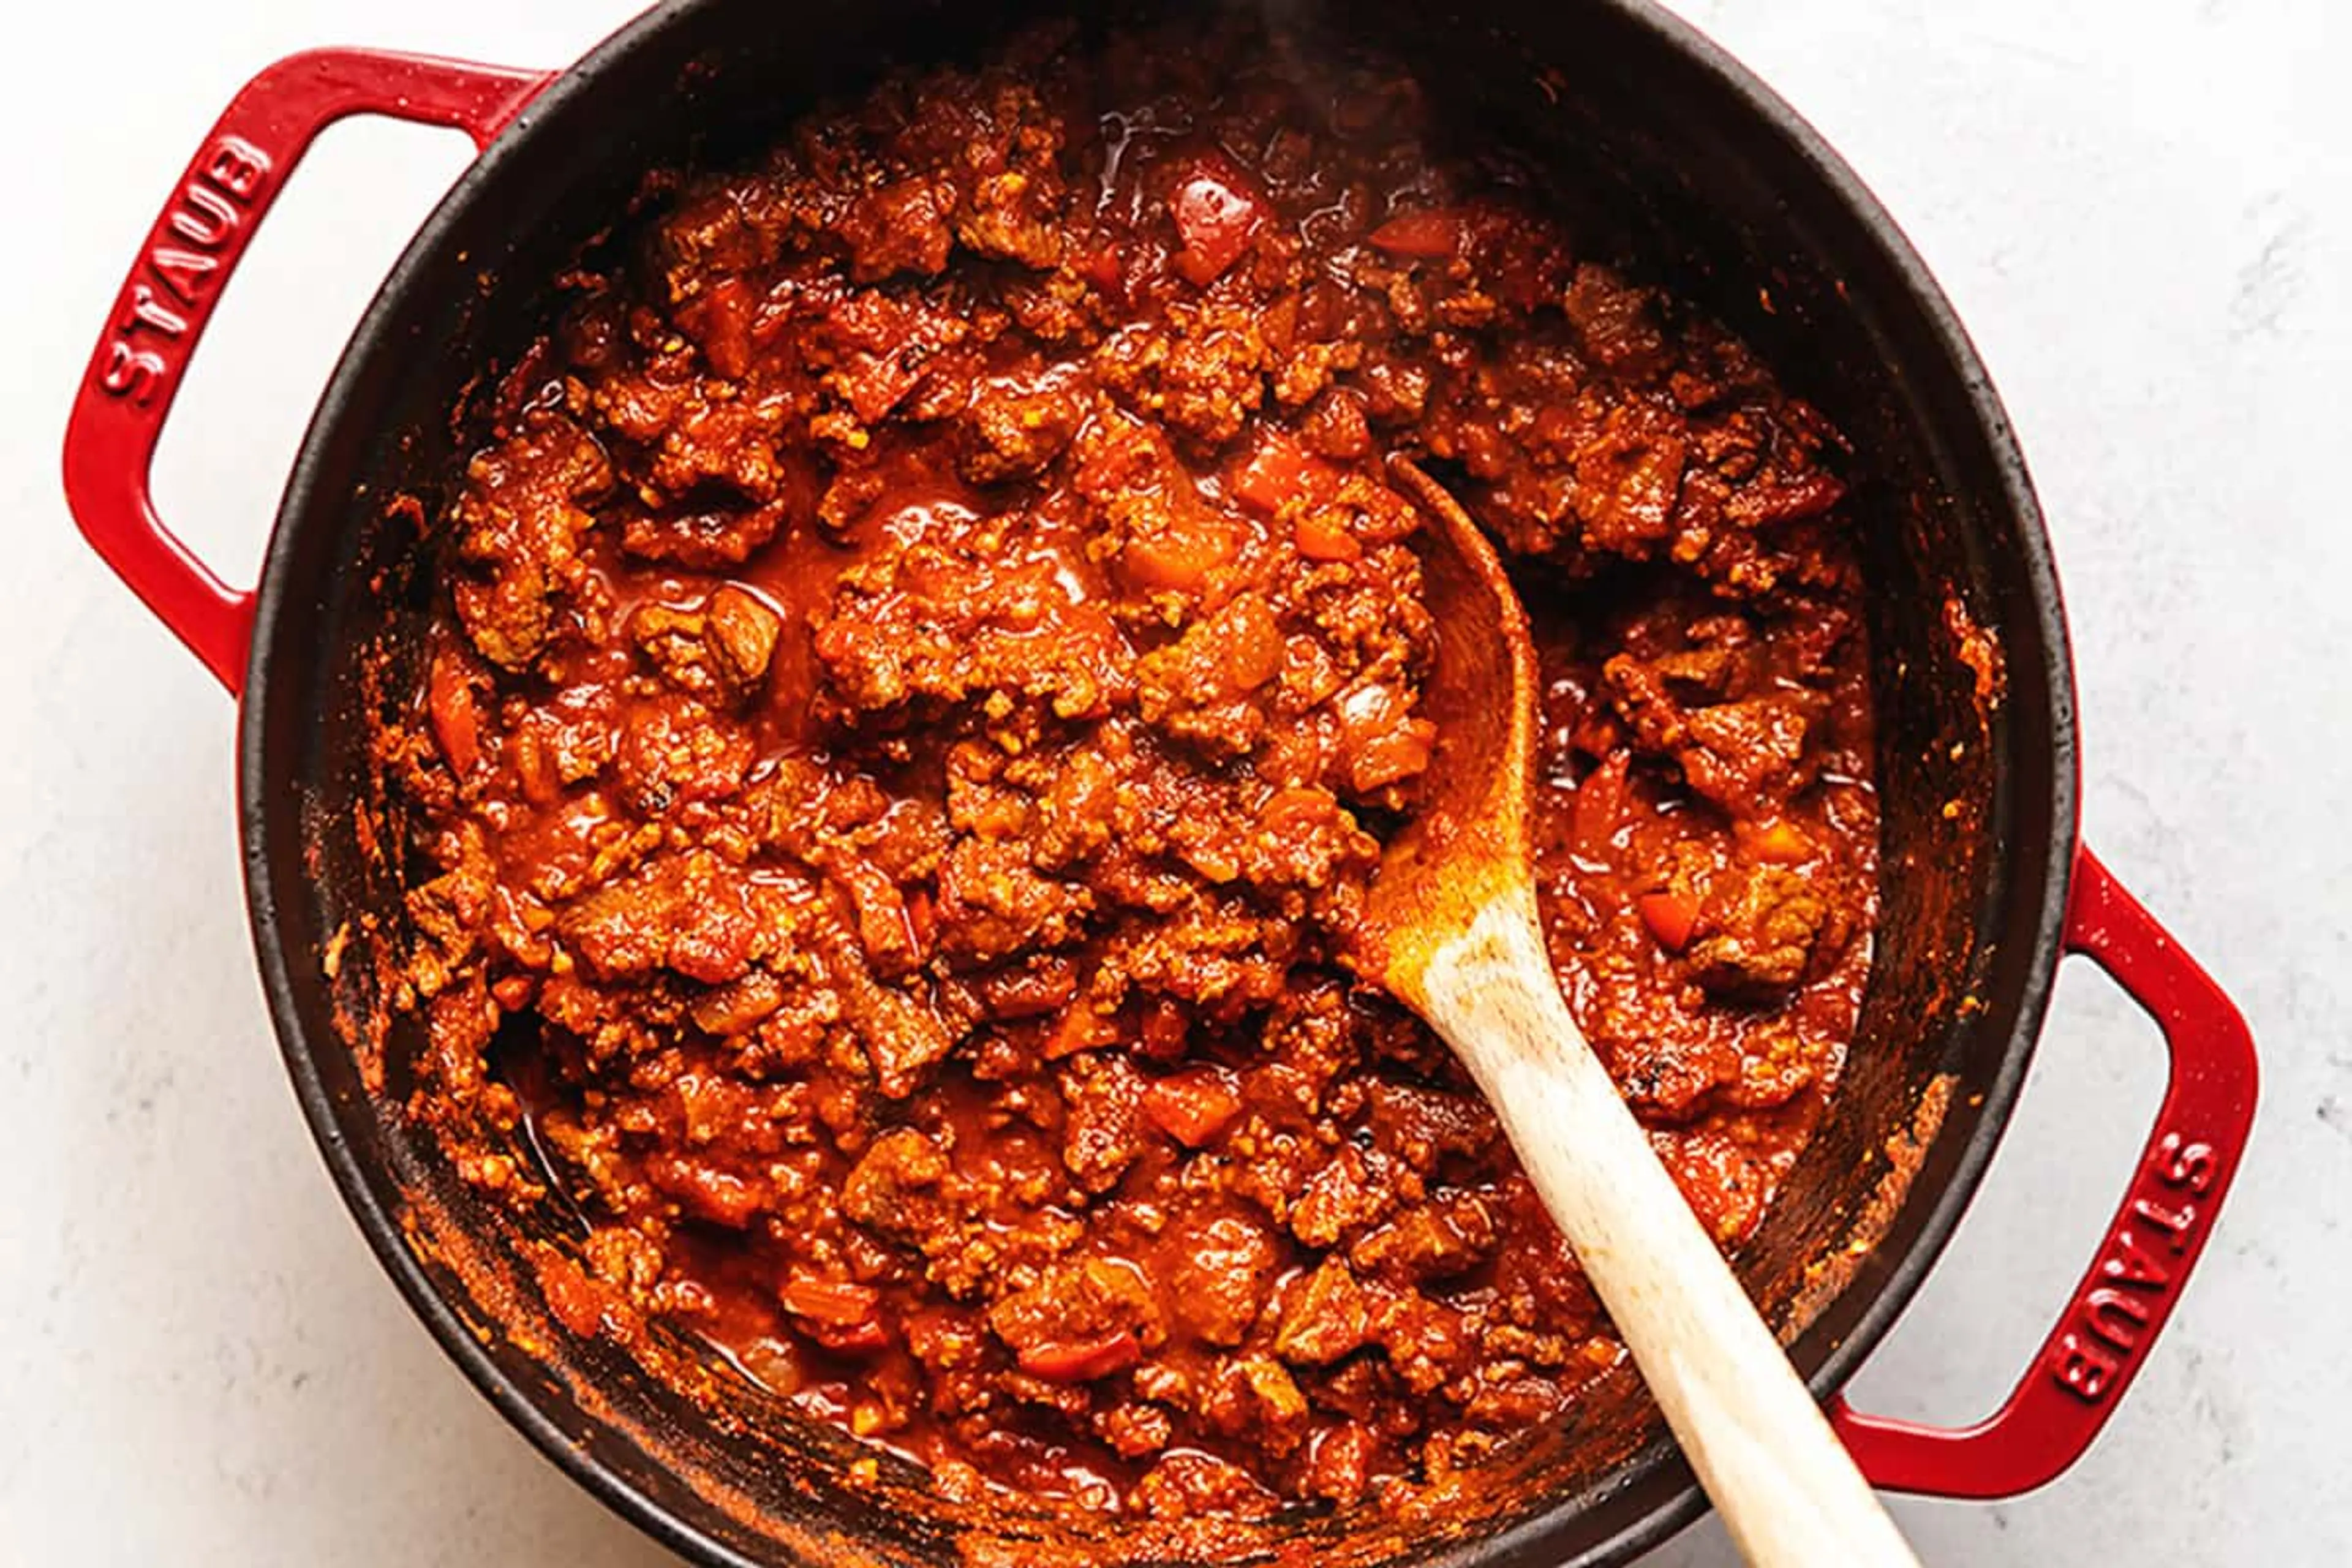 Keto Chili Recipe with Double Meat - Thick and Hearty